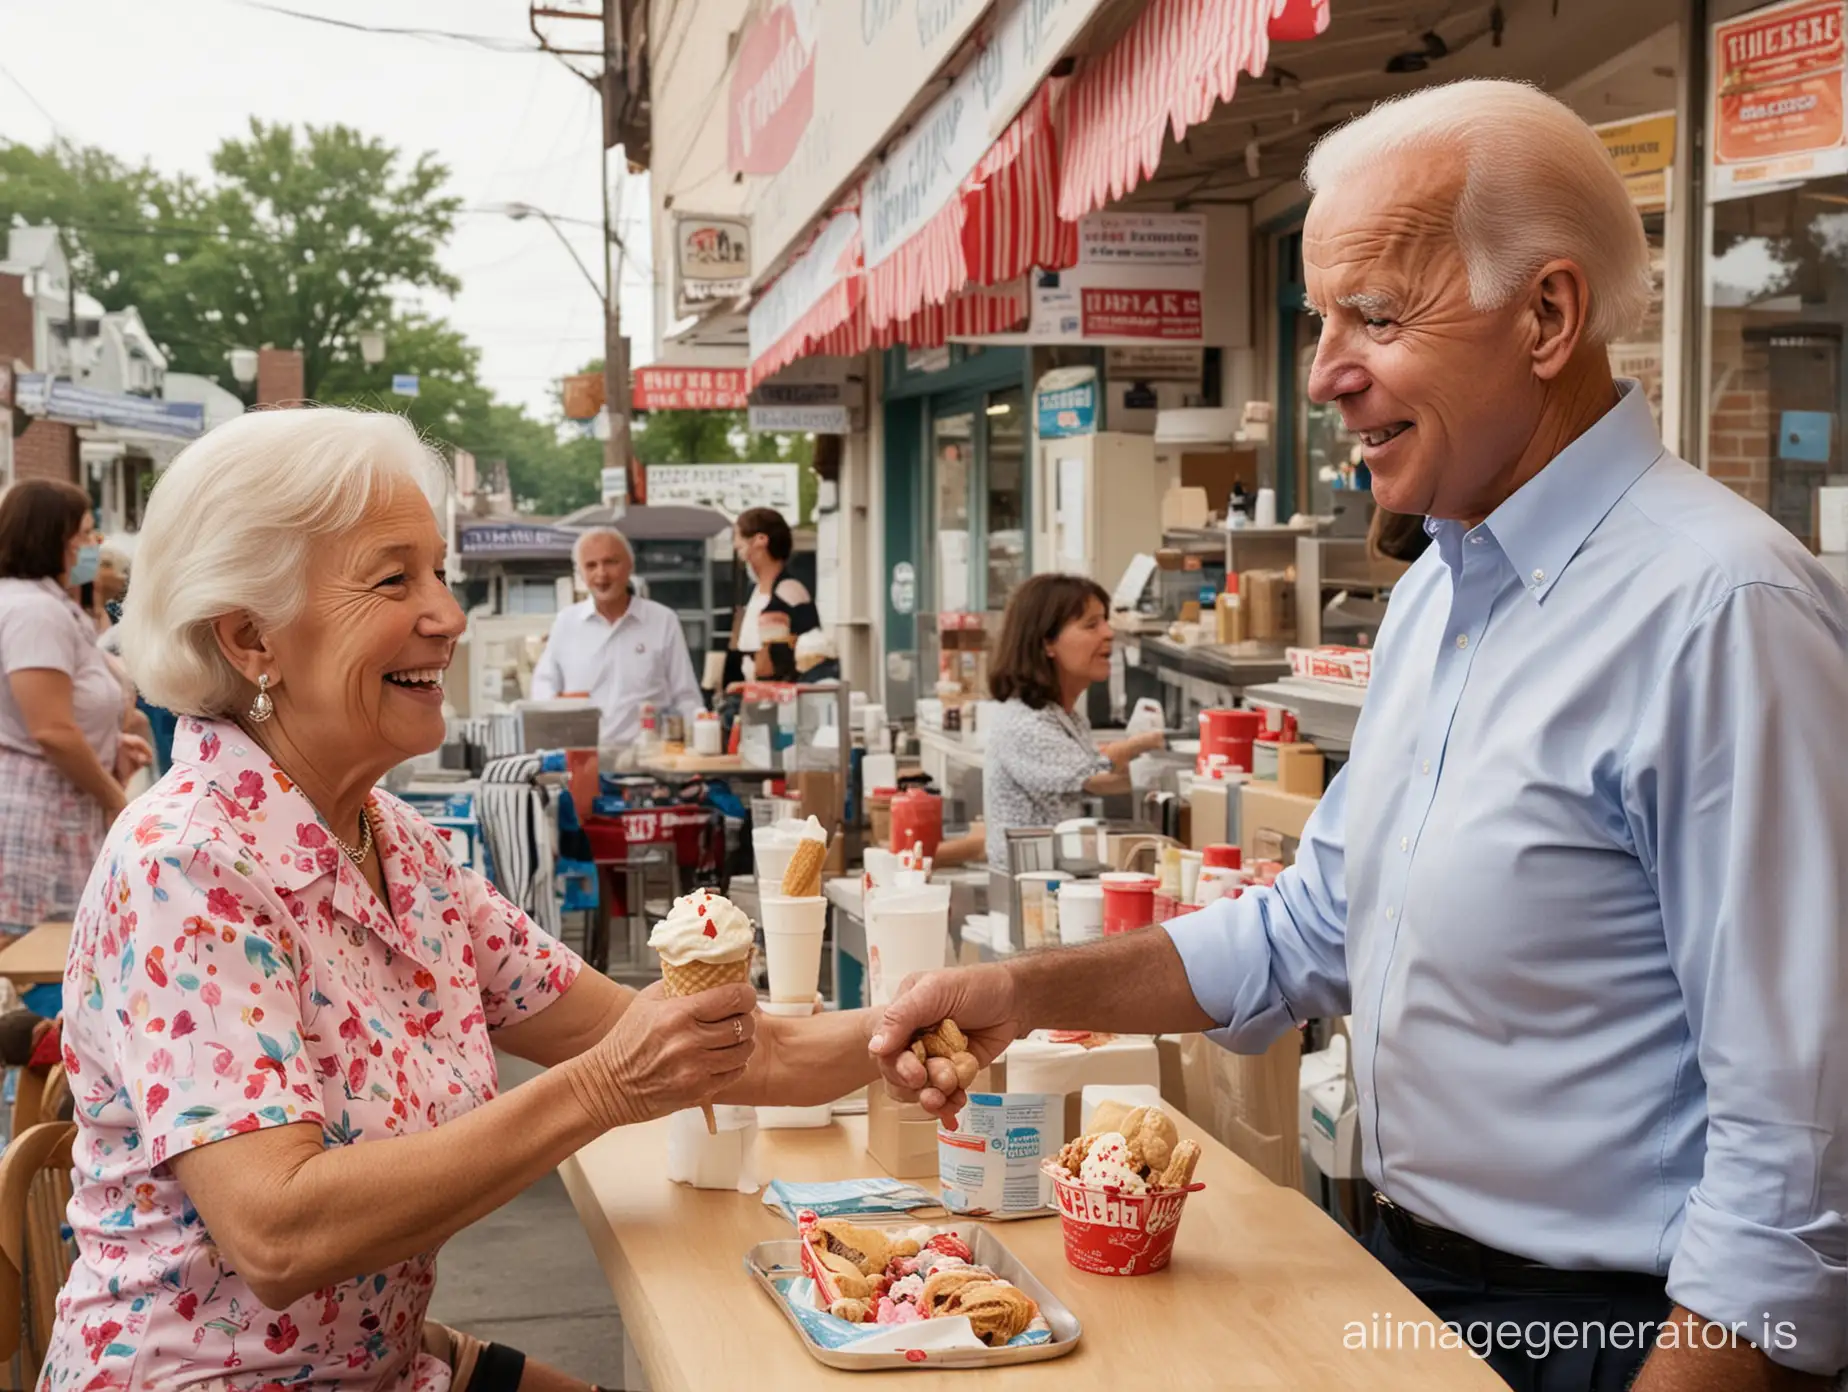 Joe Biden serve in an ice cream store an old woman on the table